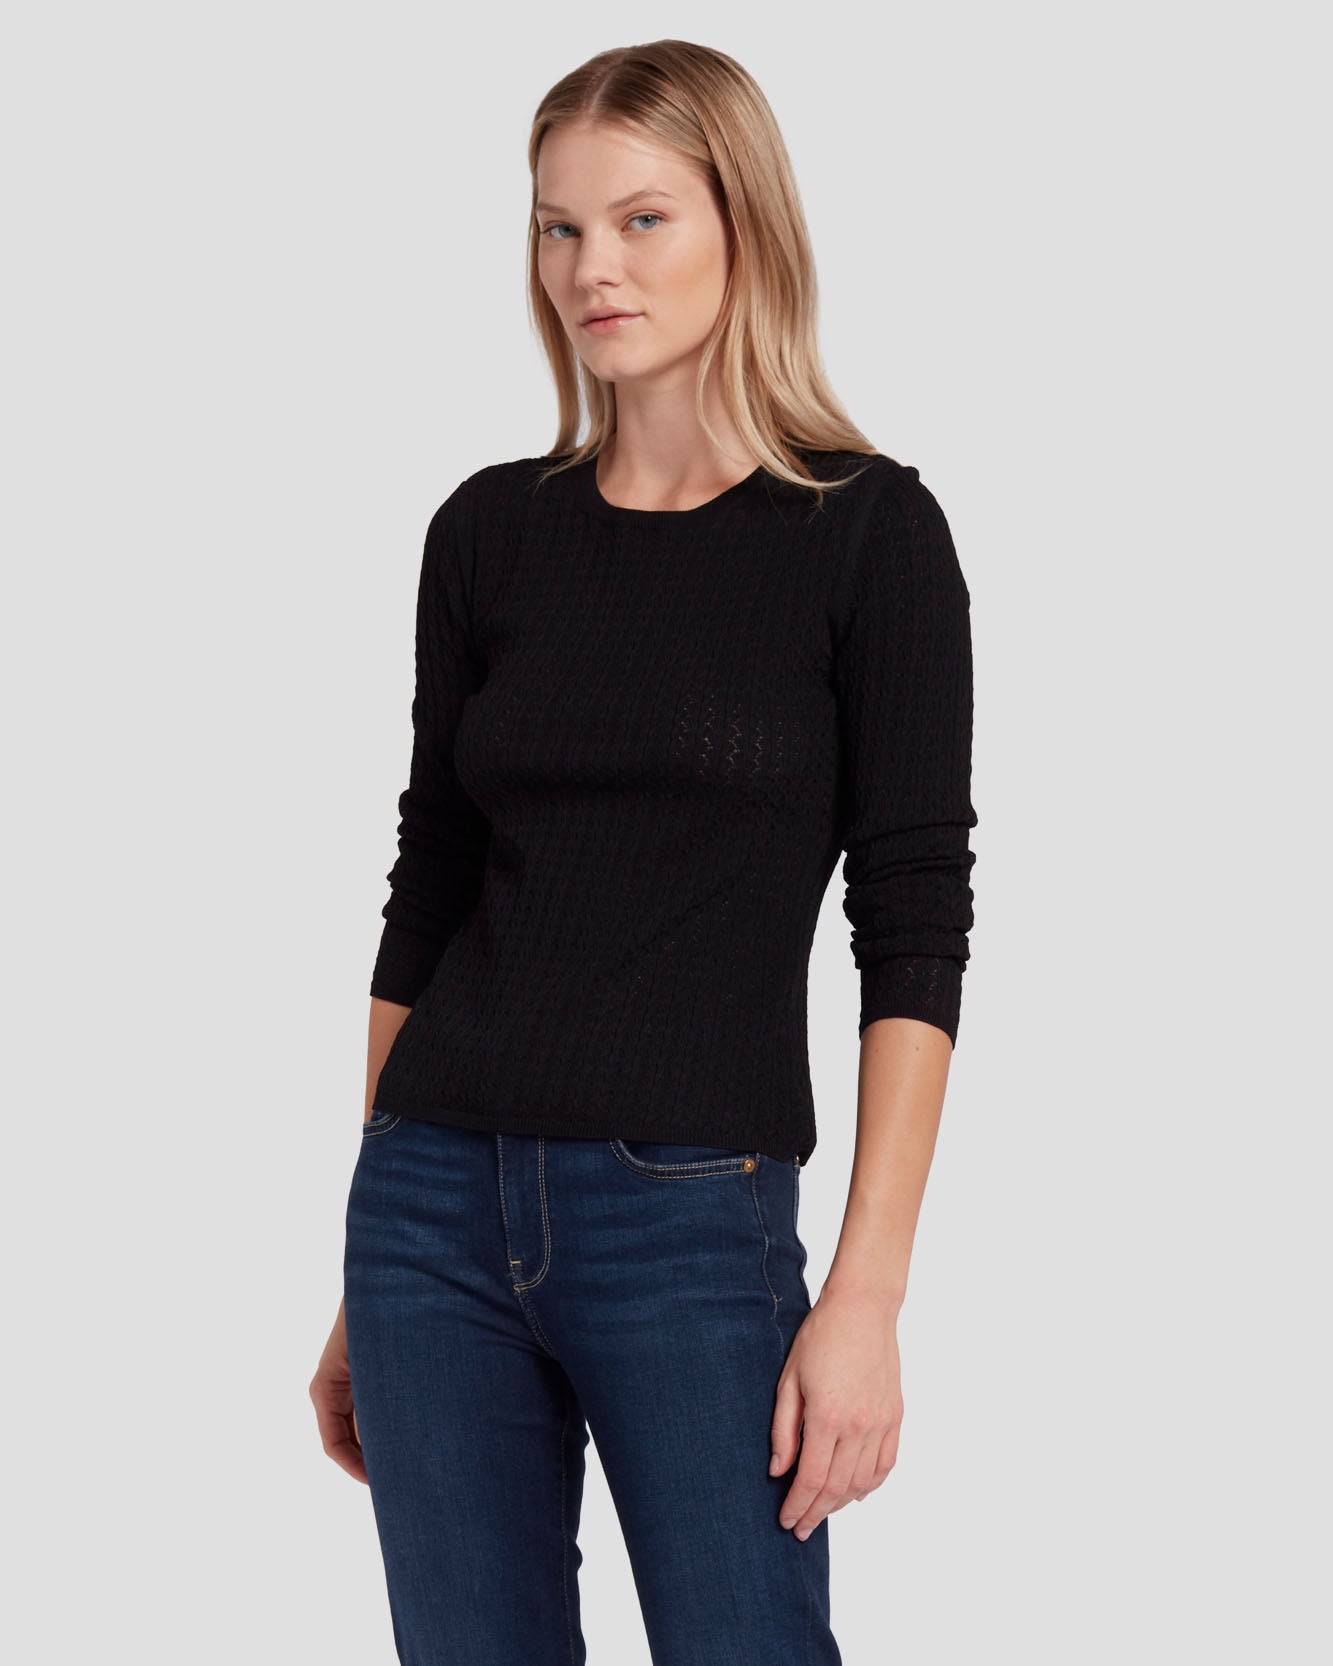 Knit Weave Top in Black | 7 For All Mankind